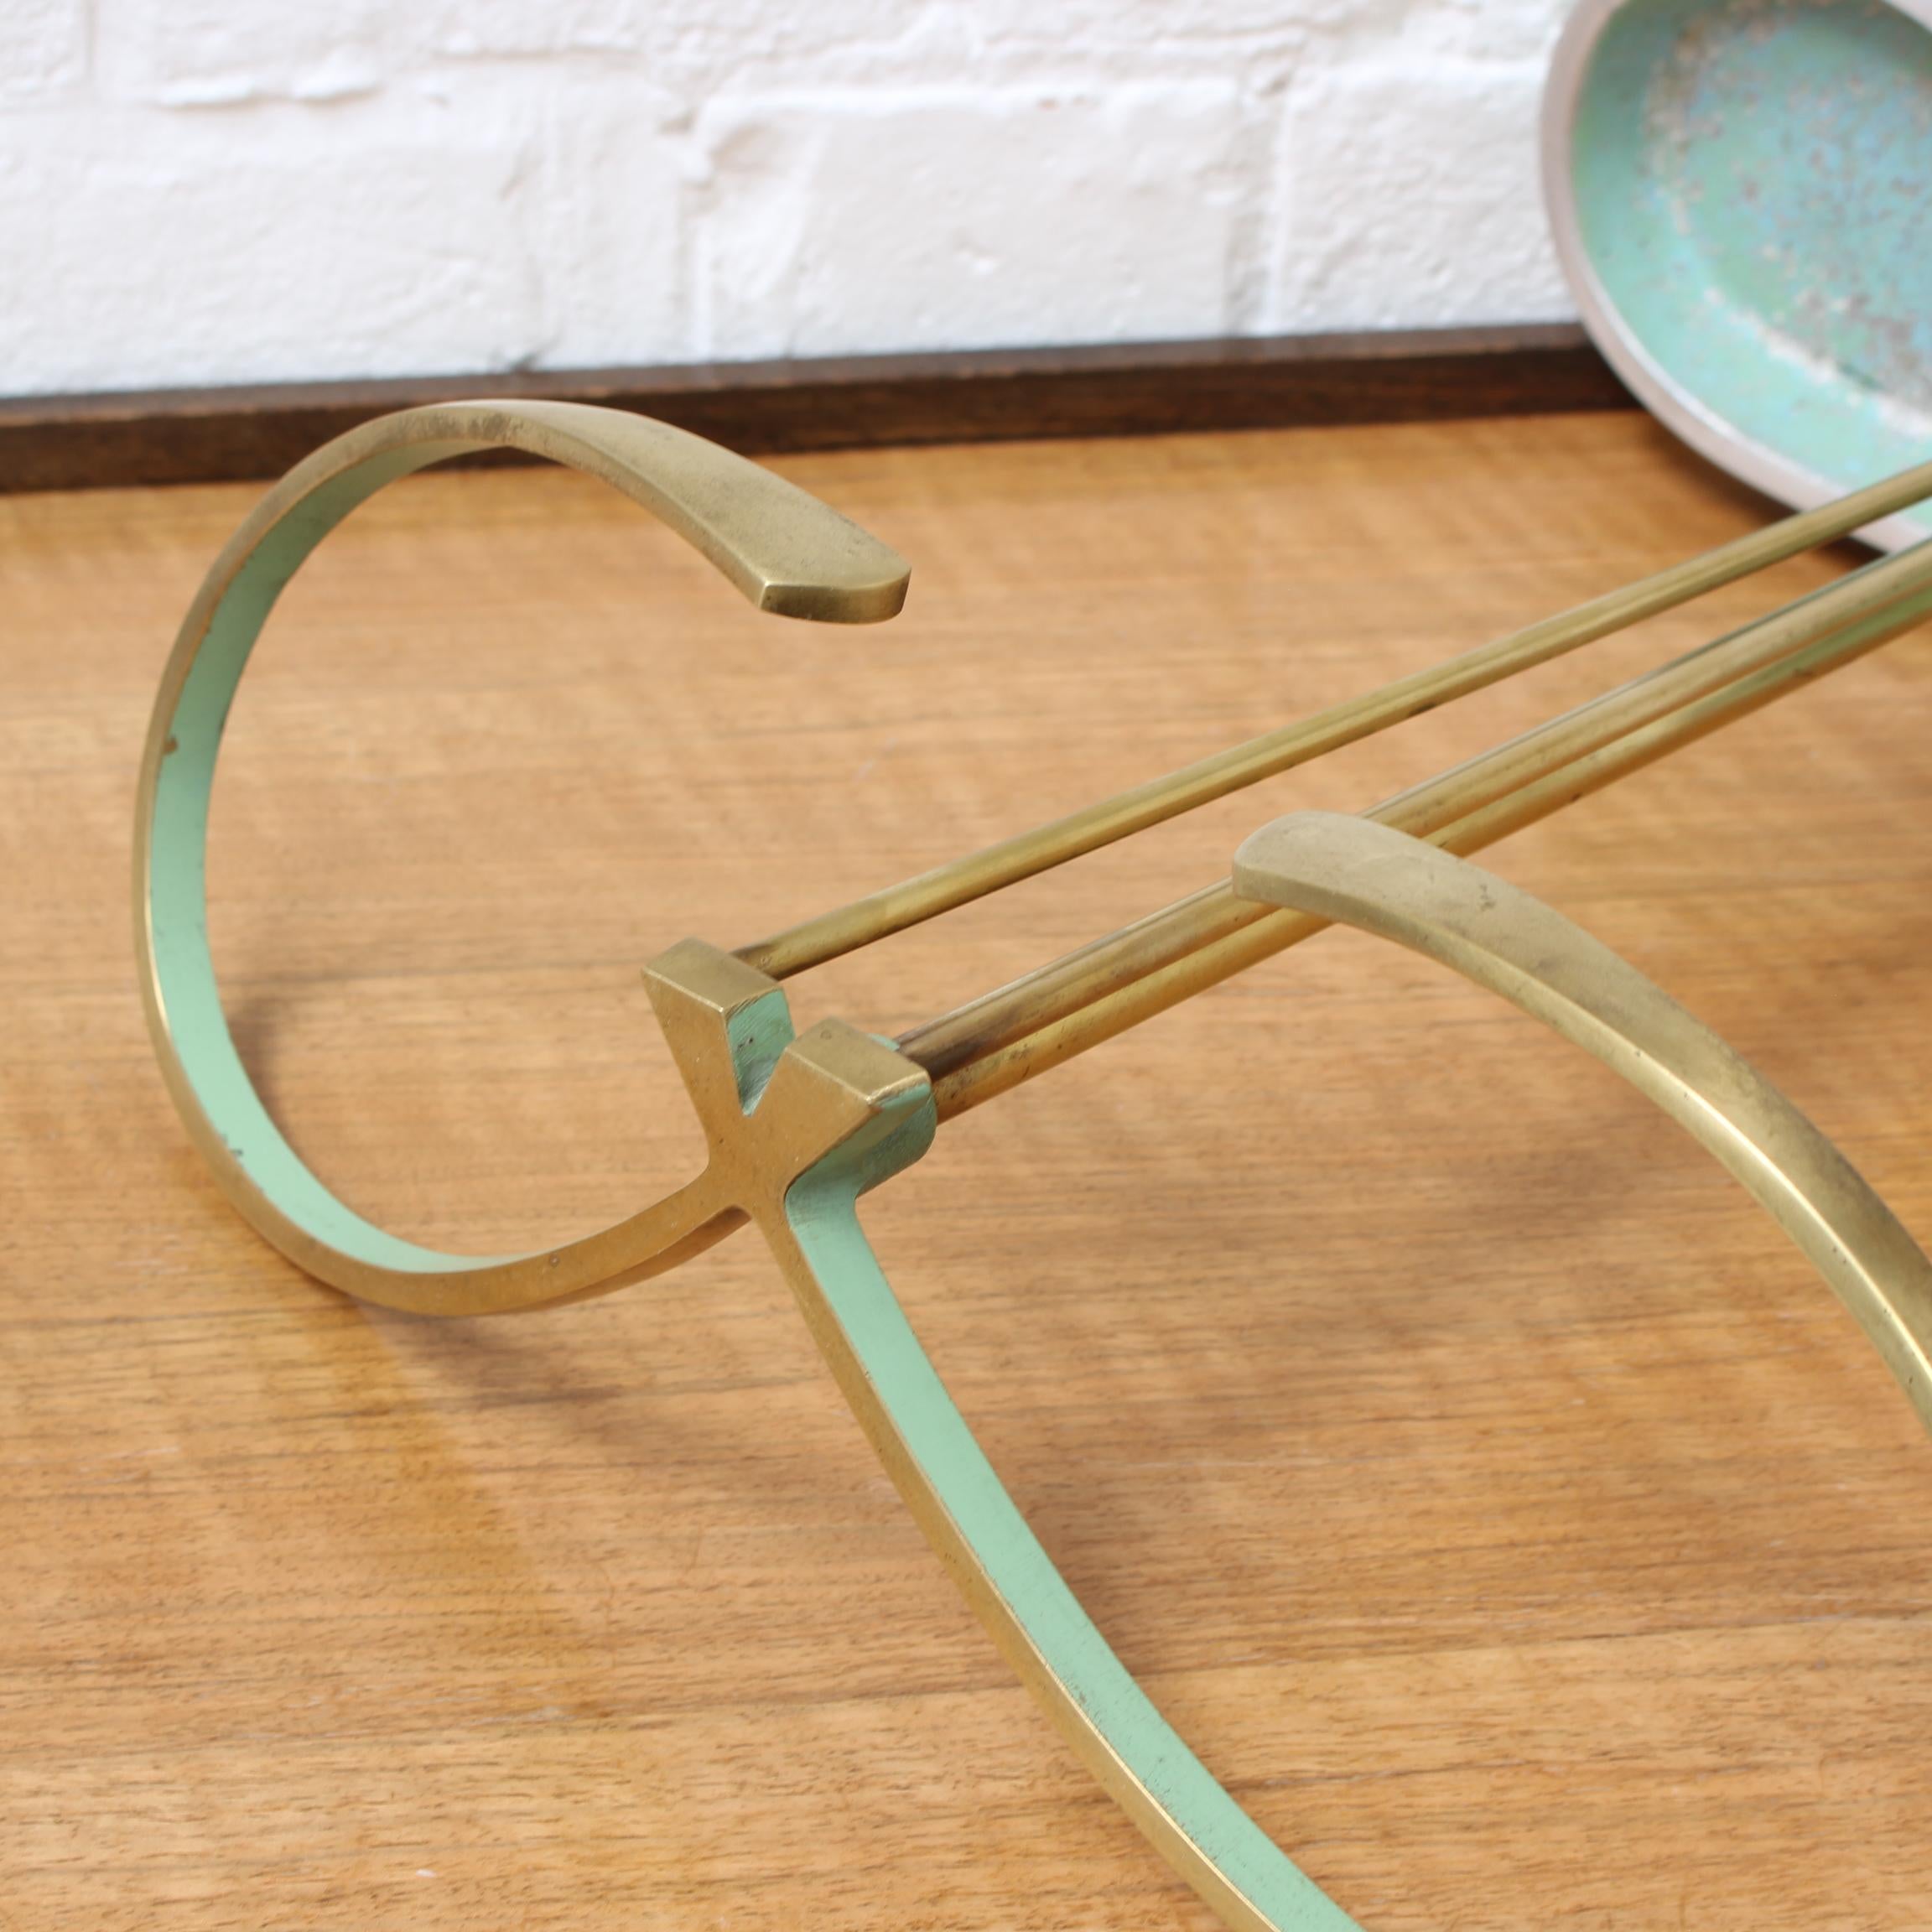 Midcentury Modern Brass Umbrella Stand Attributed to Artes H&H Seefried Steppach For Sale 6